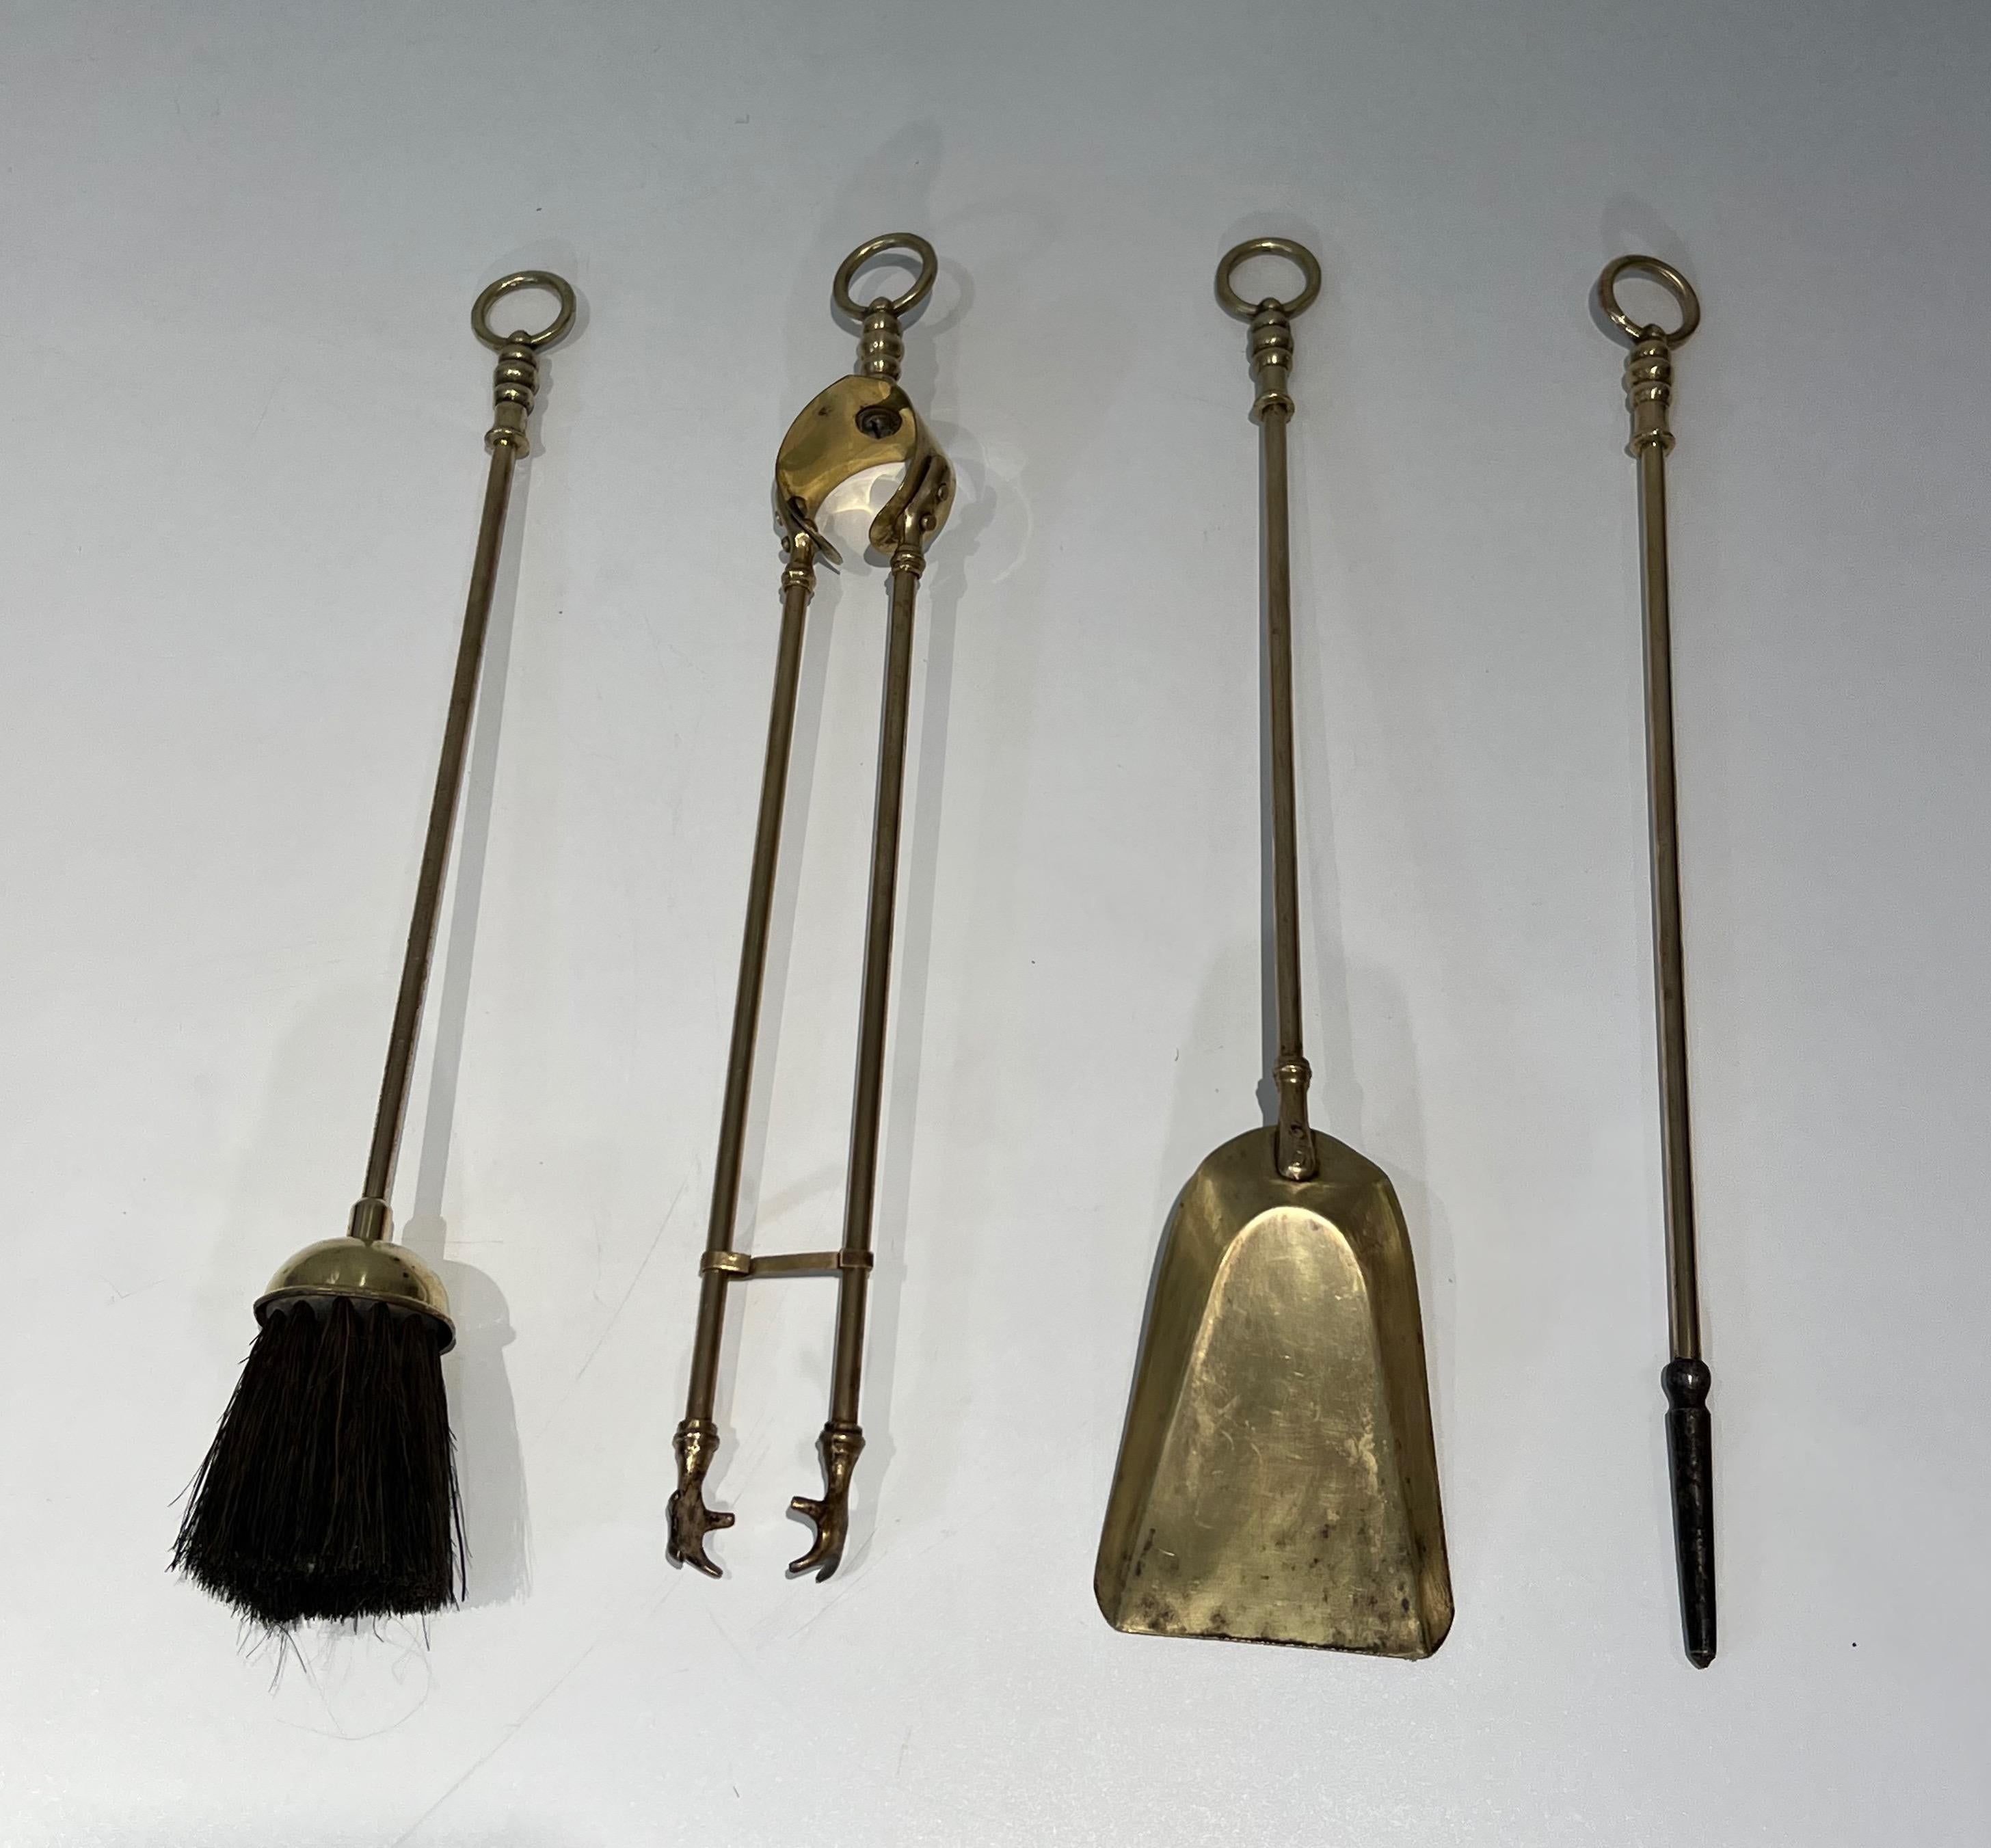 Rare Brass Fireplace Tools Surmounted by a Sculpture representing a Horse For Sale 2